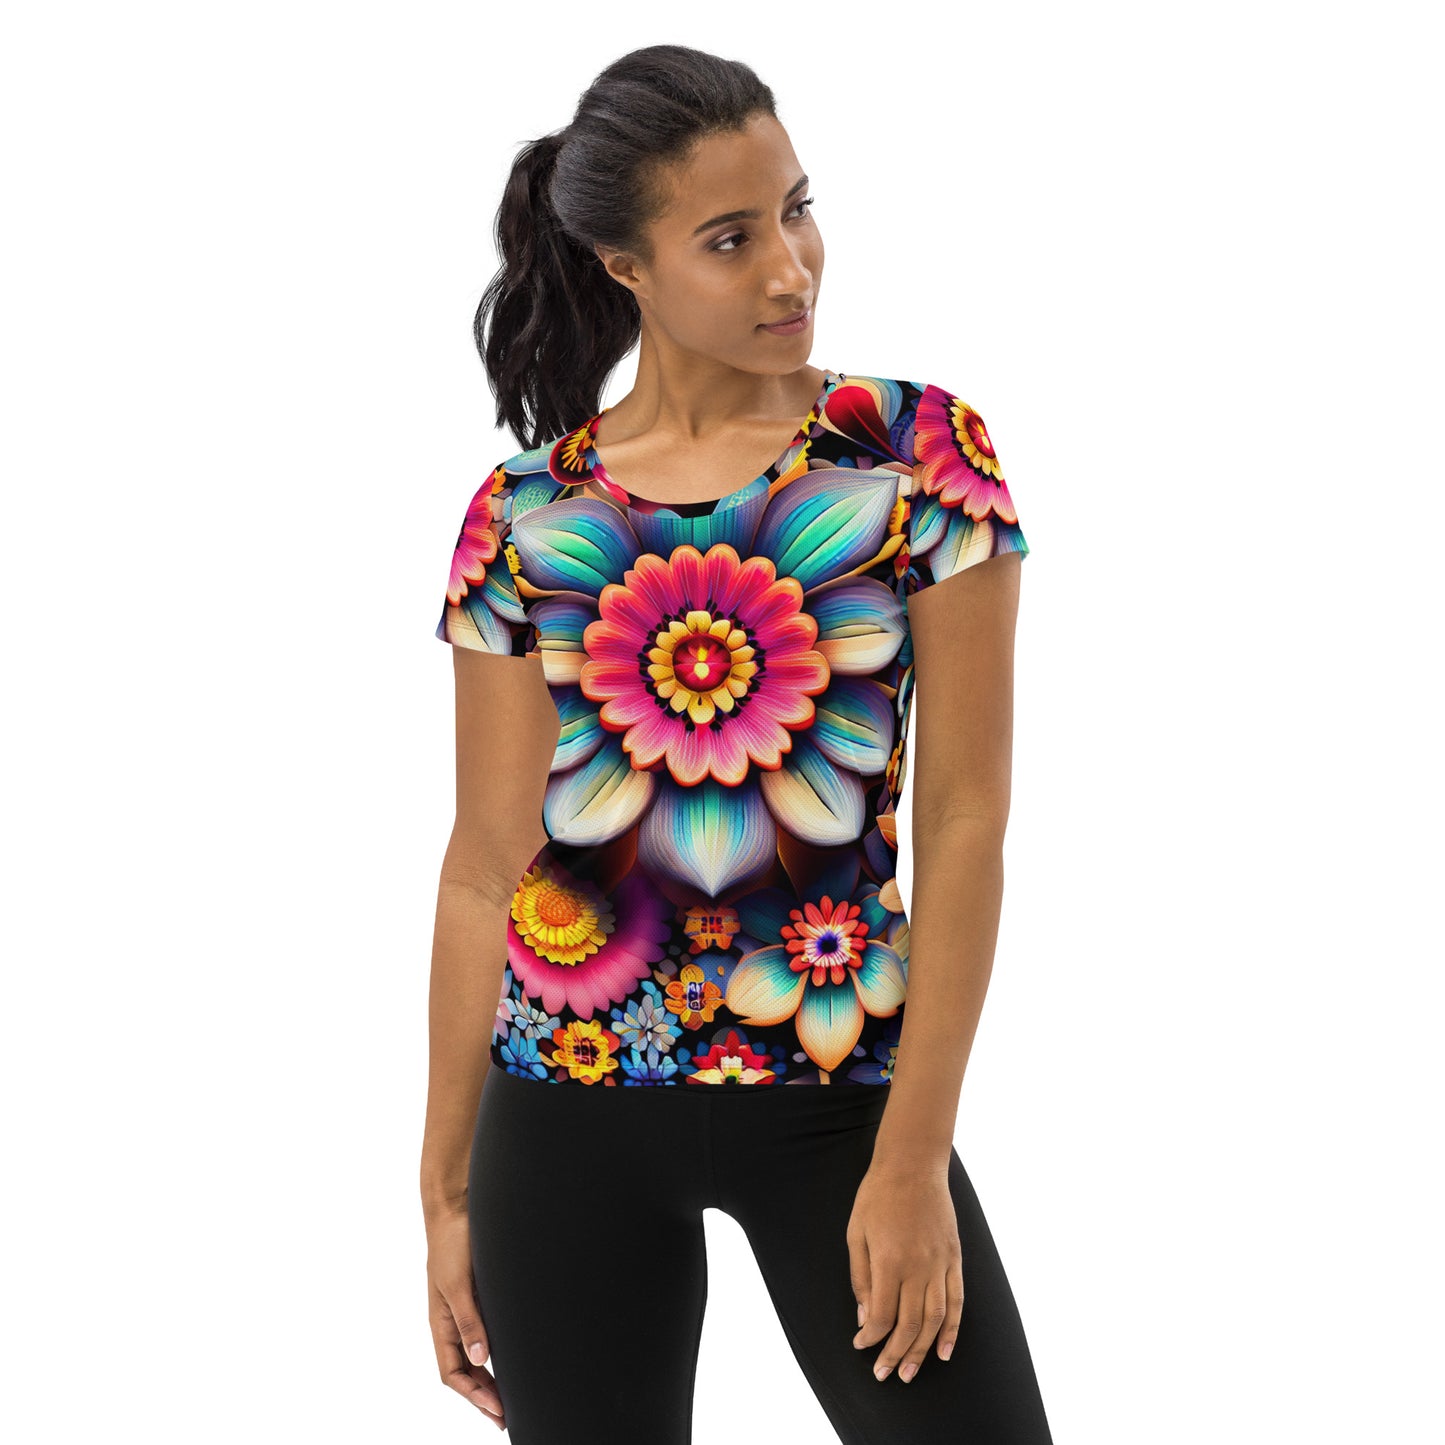 DMV 0219 Floral All-Over Print Women's Athletic T-shirt